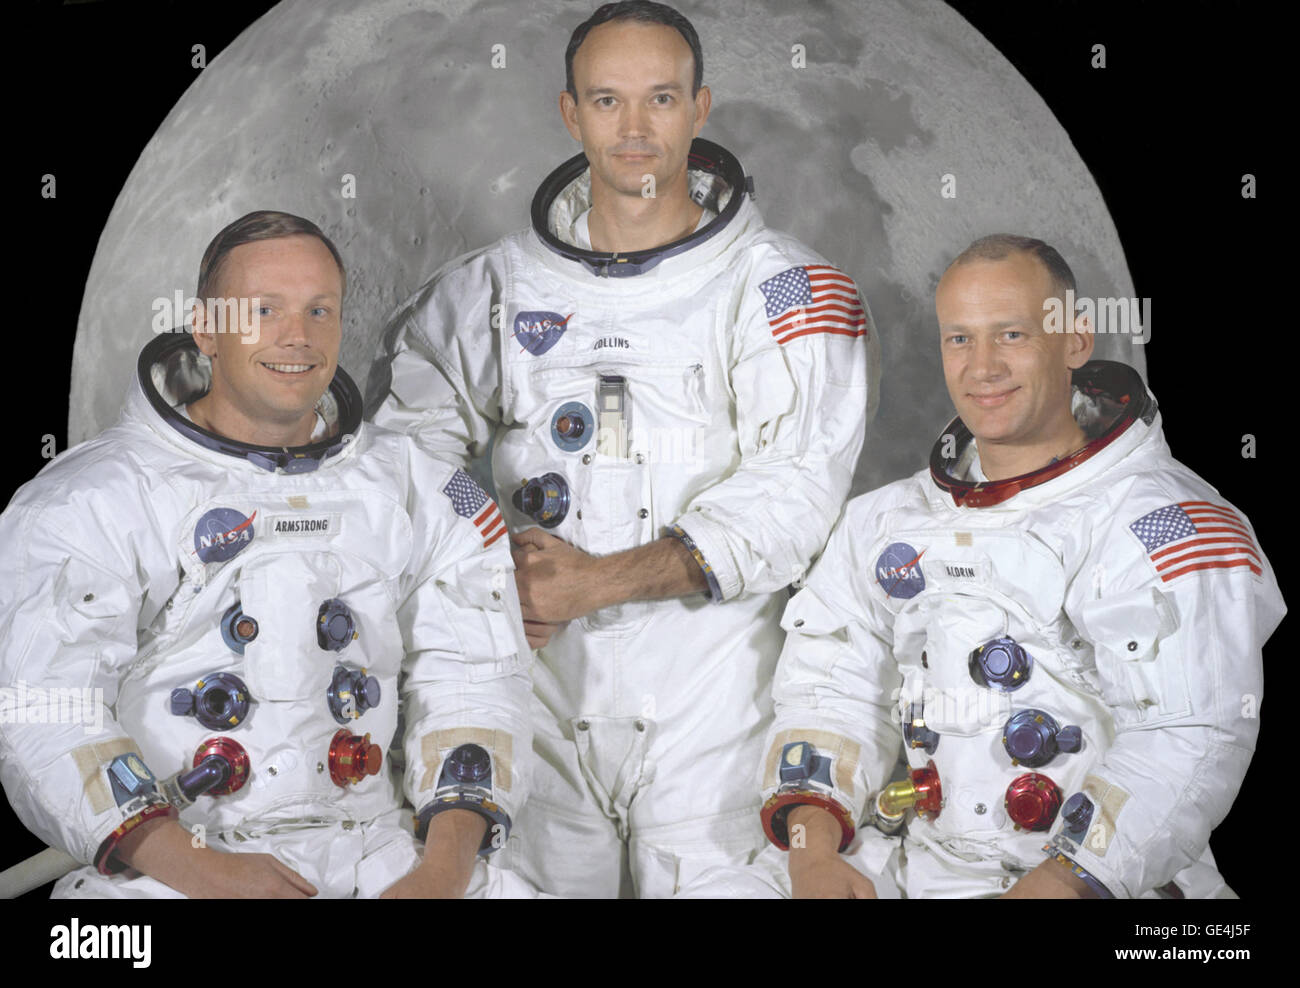 Portrait of the prime crew of the Apollo 11 lunar landing mission. From left to right they are: Commander, Neil A. Armstrong, Command Module Pilot, Michael Collins, and Lunar Module Pilot, Edwin E. Aldrin Jr. On July 20th 1969 at 4:18 PM, EDT the Lunar Module &quot;Eagle&quot; landed in a region of the Moon called the Mare Tranquillitatis, also known as the Sea of Tranquillity. After securing his spacecraft, Armstrong radioed back to earth: &quot;Houston, Tranquility Base here, the Eagle has landed&quot;. At 10:56 p.m. that same evening and witnessed by a worldwide television audience, Neil Ar Stock Photo